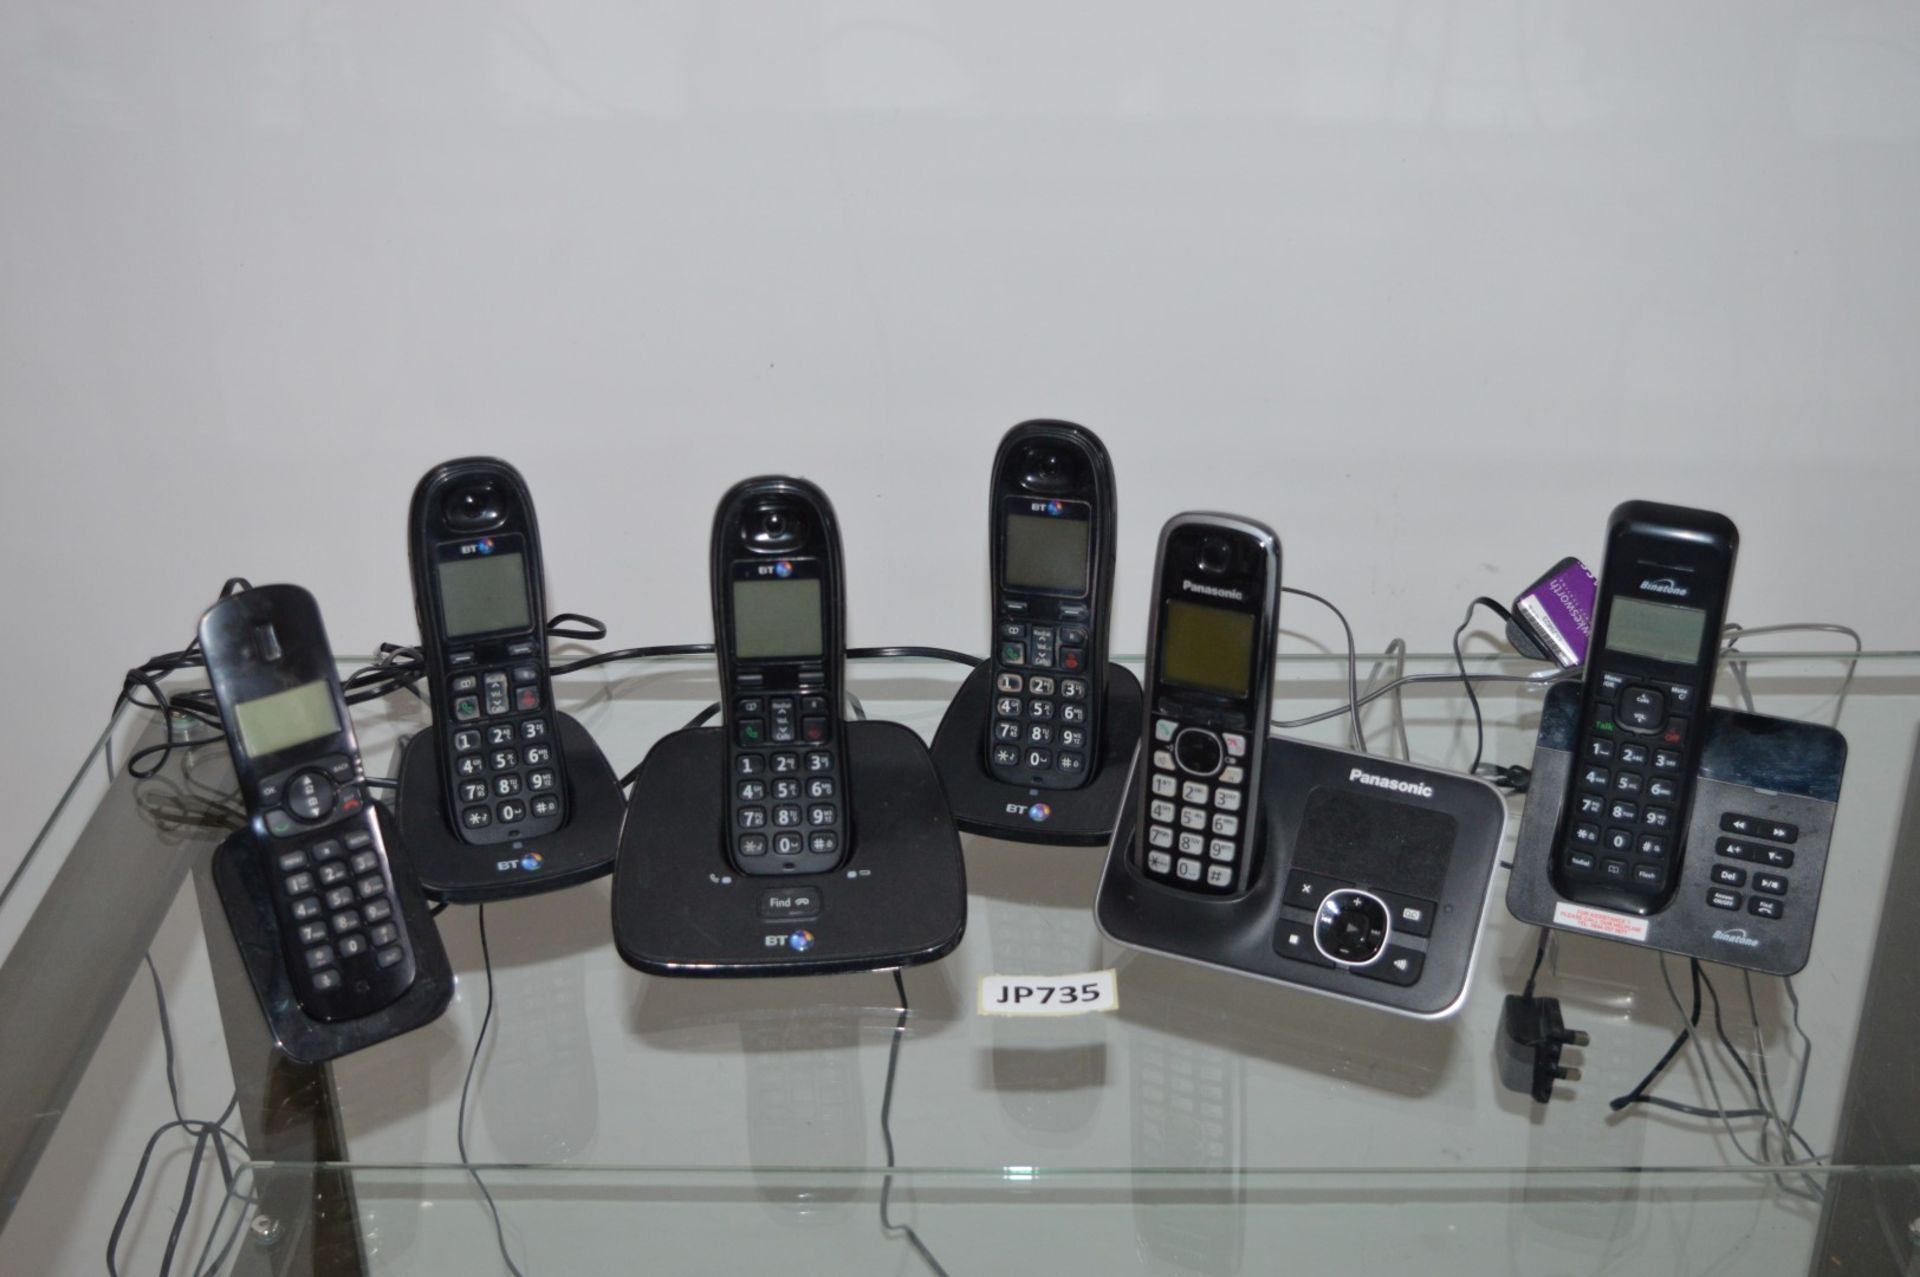 6 x Cordless Phone Handsets - Includes BT, Binatone and Panasonic Models - CL285 - Ref JP735 - - Image 2 of 4